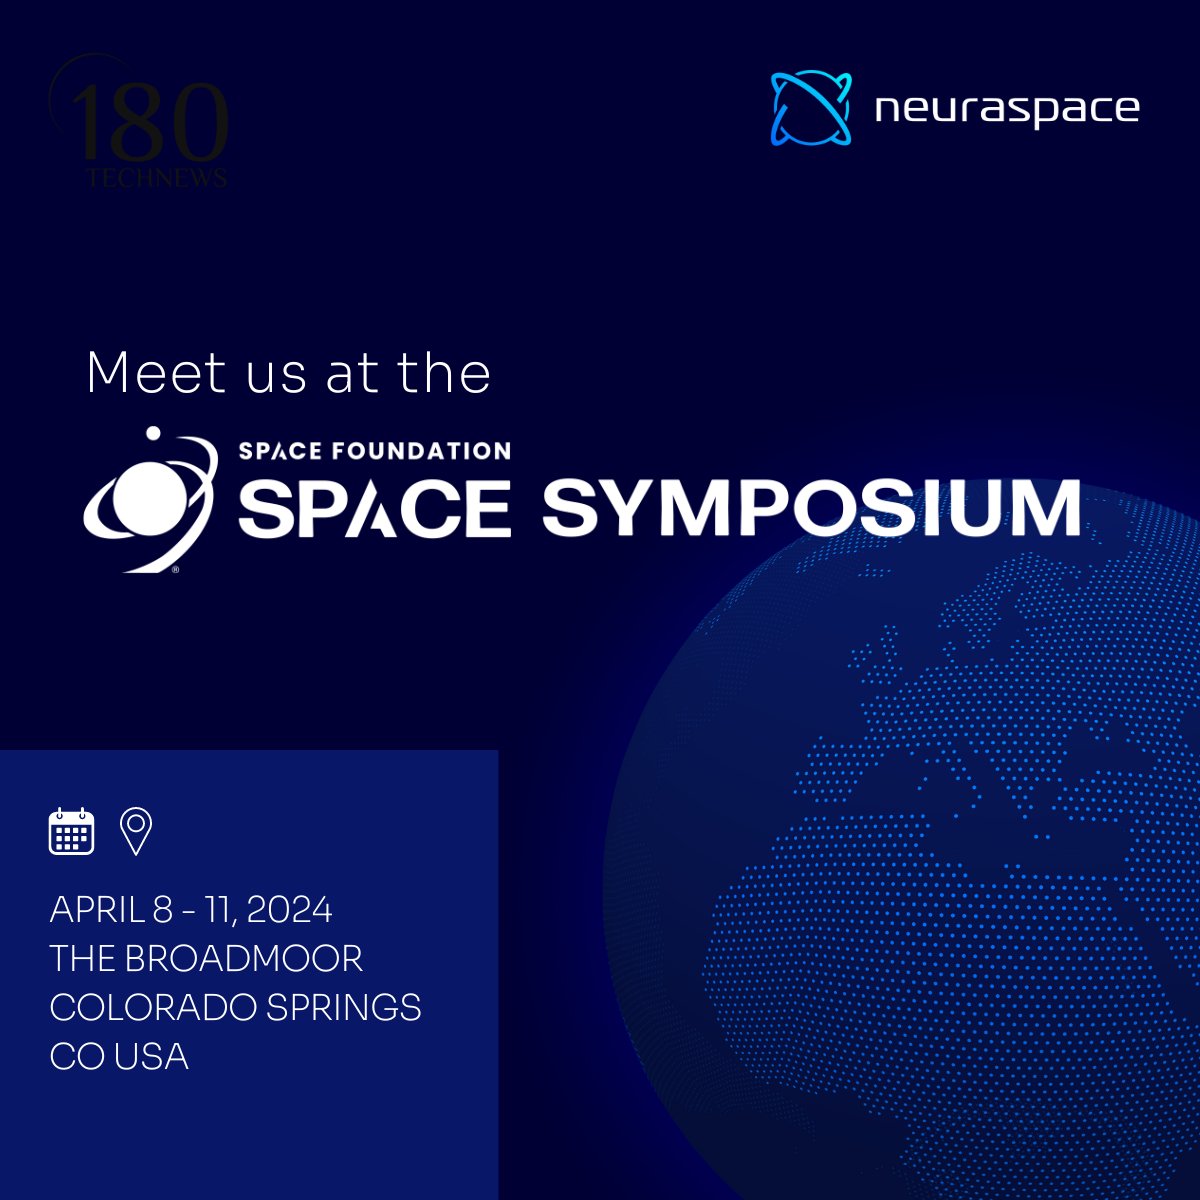 Join Neuraspace at the Space Symposium! 📅April 8-11, 2024 📌The Broadmoor, Colorado Springs, CO USA 📣Catch Chiara Manfletti's session: ➡️Generative AI: Changing the Way We Approach Content Creation ➡️Thursday, April 11, 2024 | 8:45 am - 9:30 am